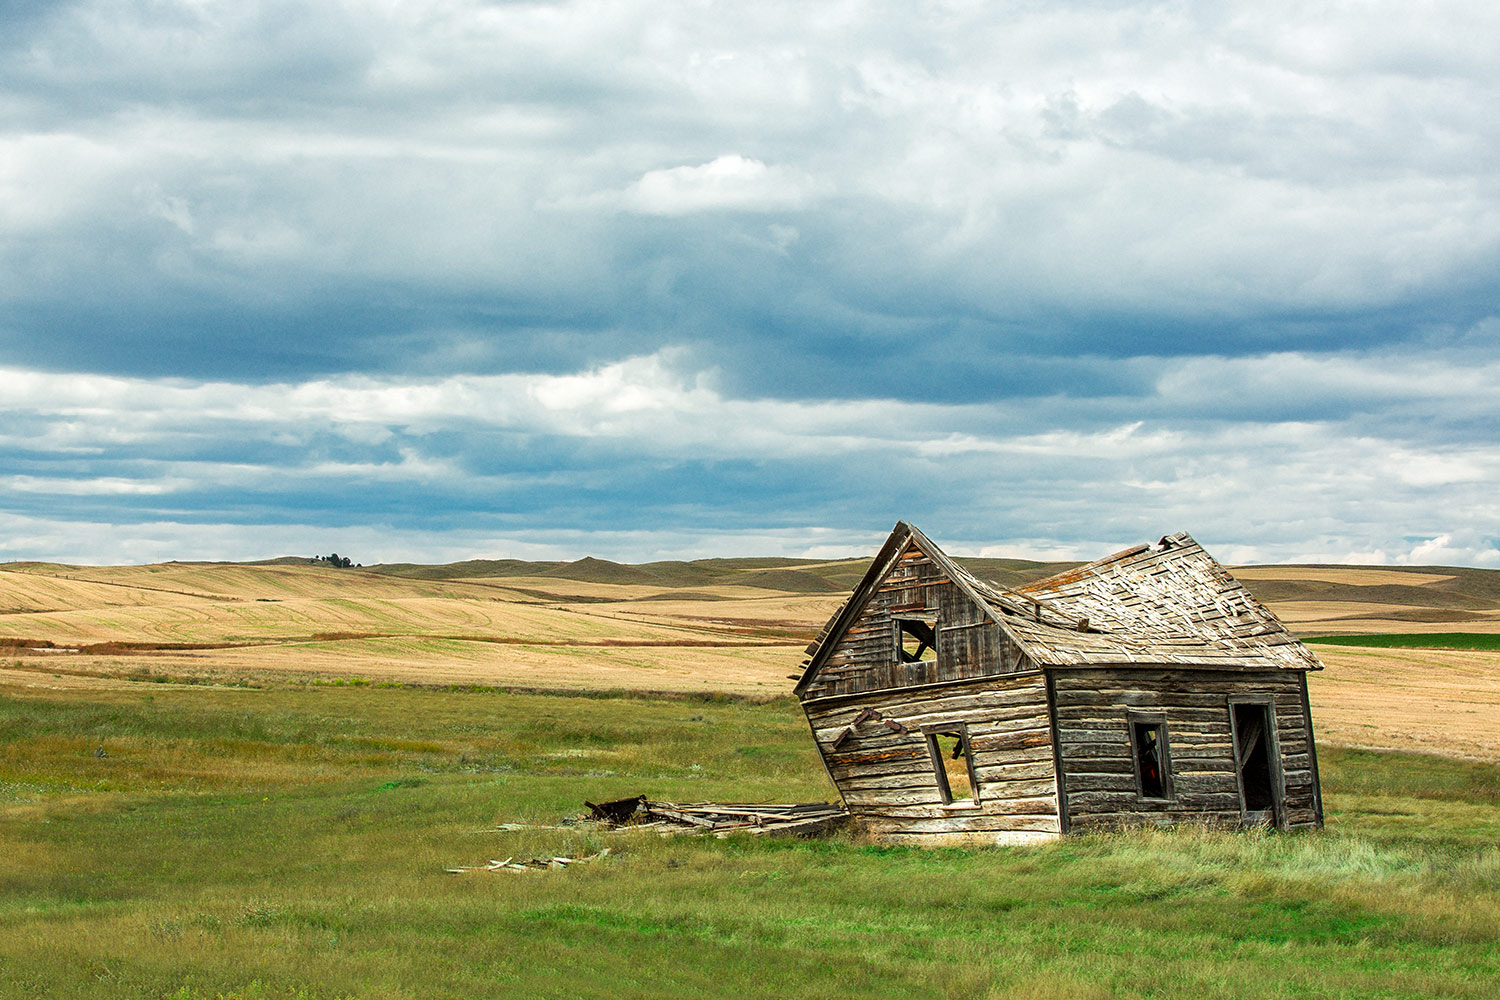 An old, broken down shack on Montana's prairie outside of the small town of Winifred. Within a week of me making this photo this beautiful old building was gone.&nbsp;→ Buy a Print&nbsp;or License Photo